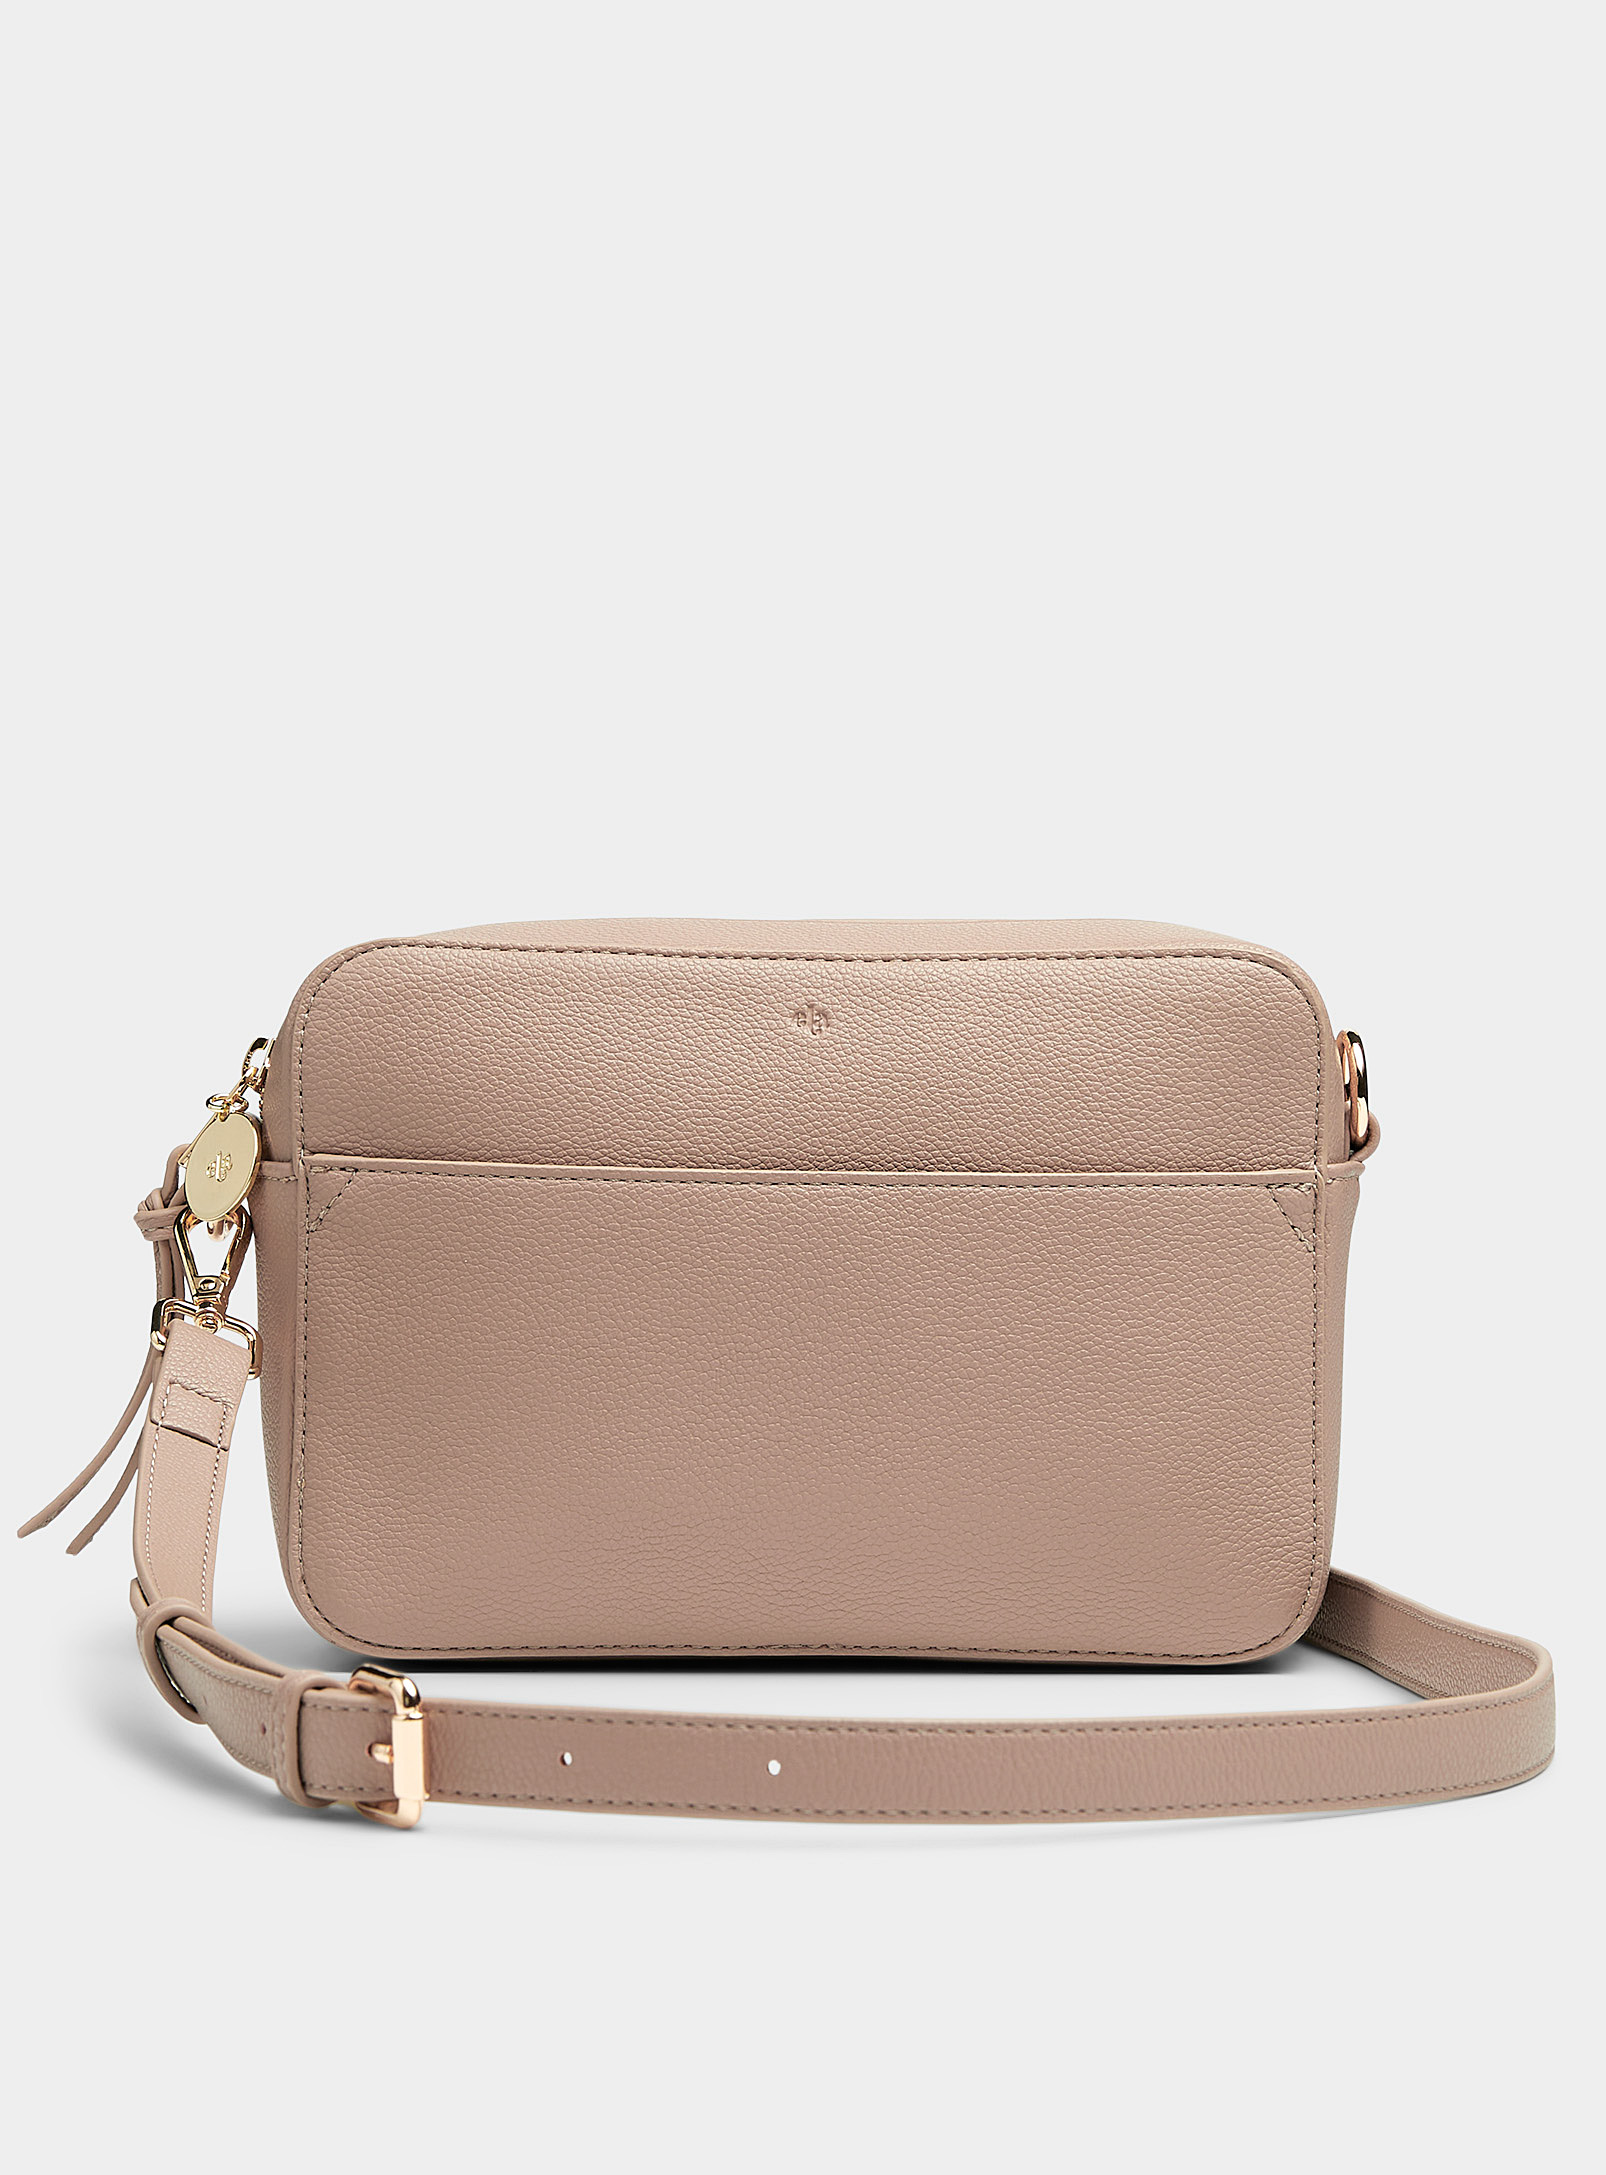 Ela Small Bloom Pebbled Boxy Bag In Light Brown